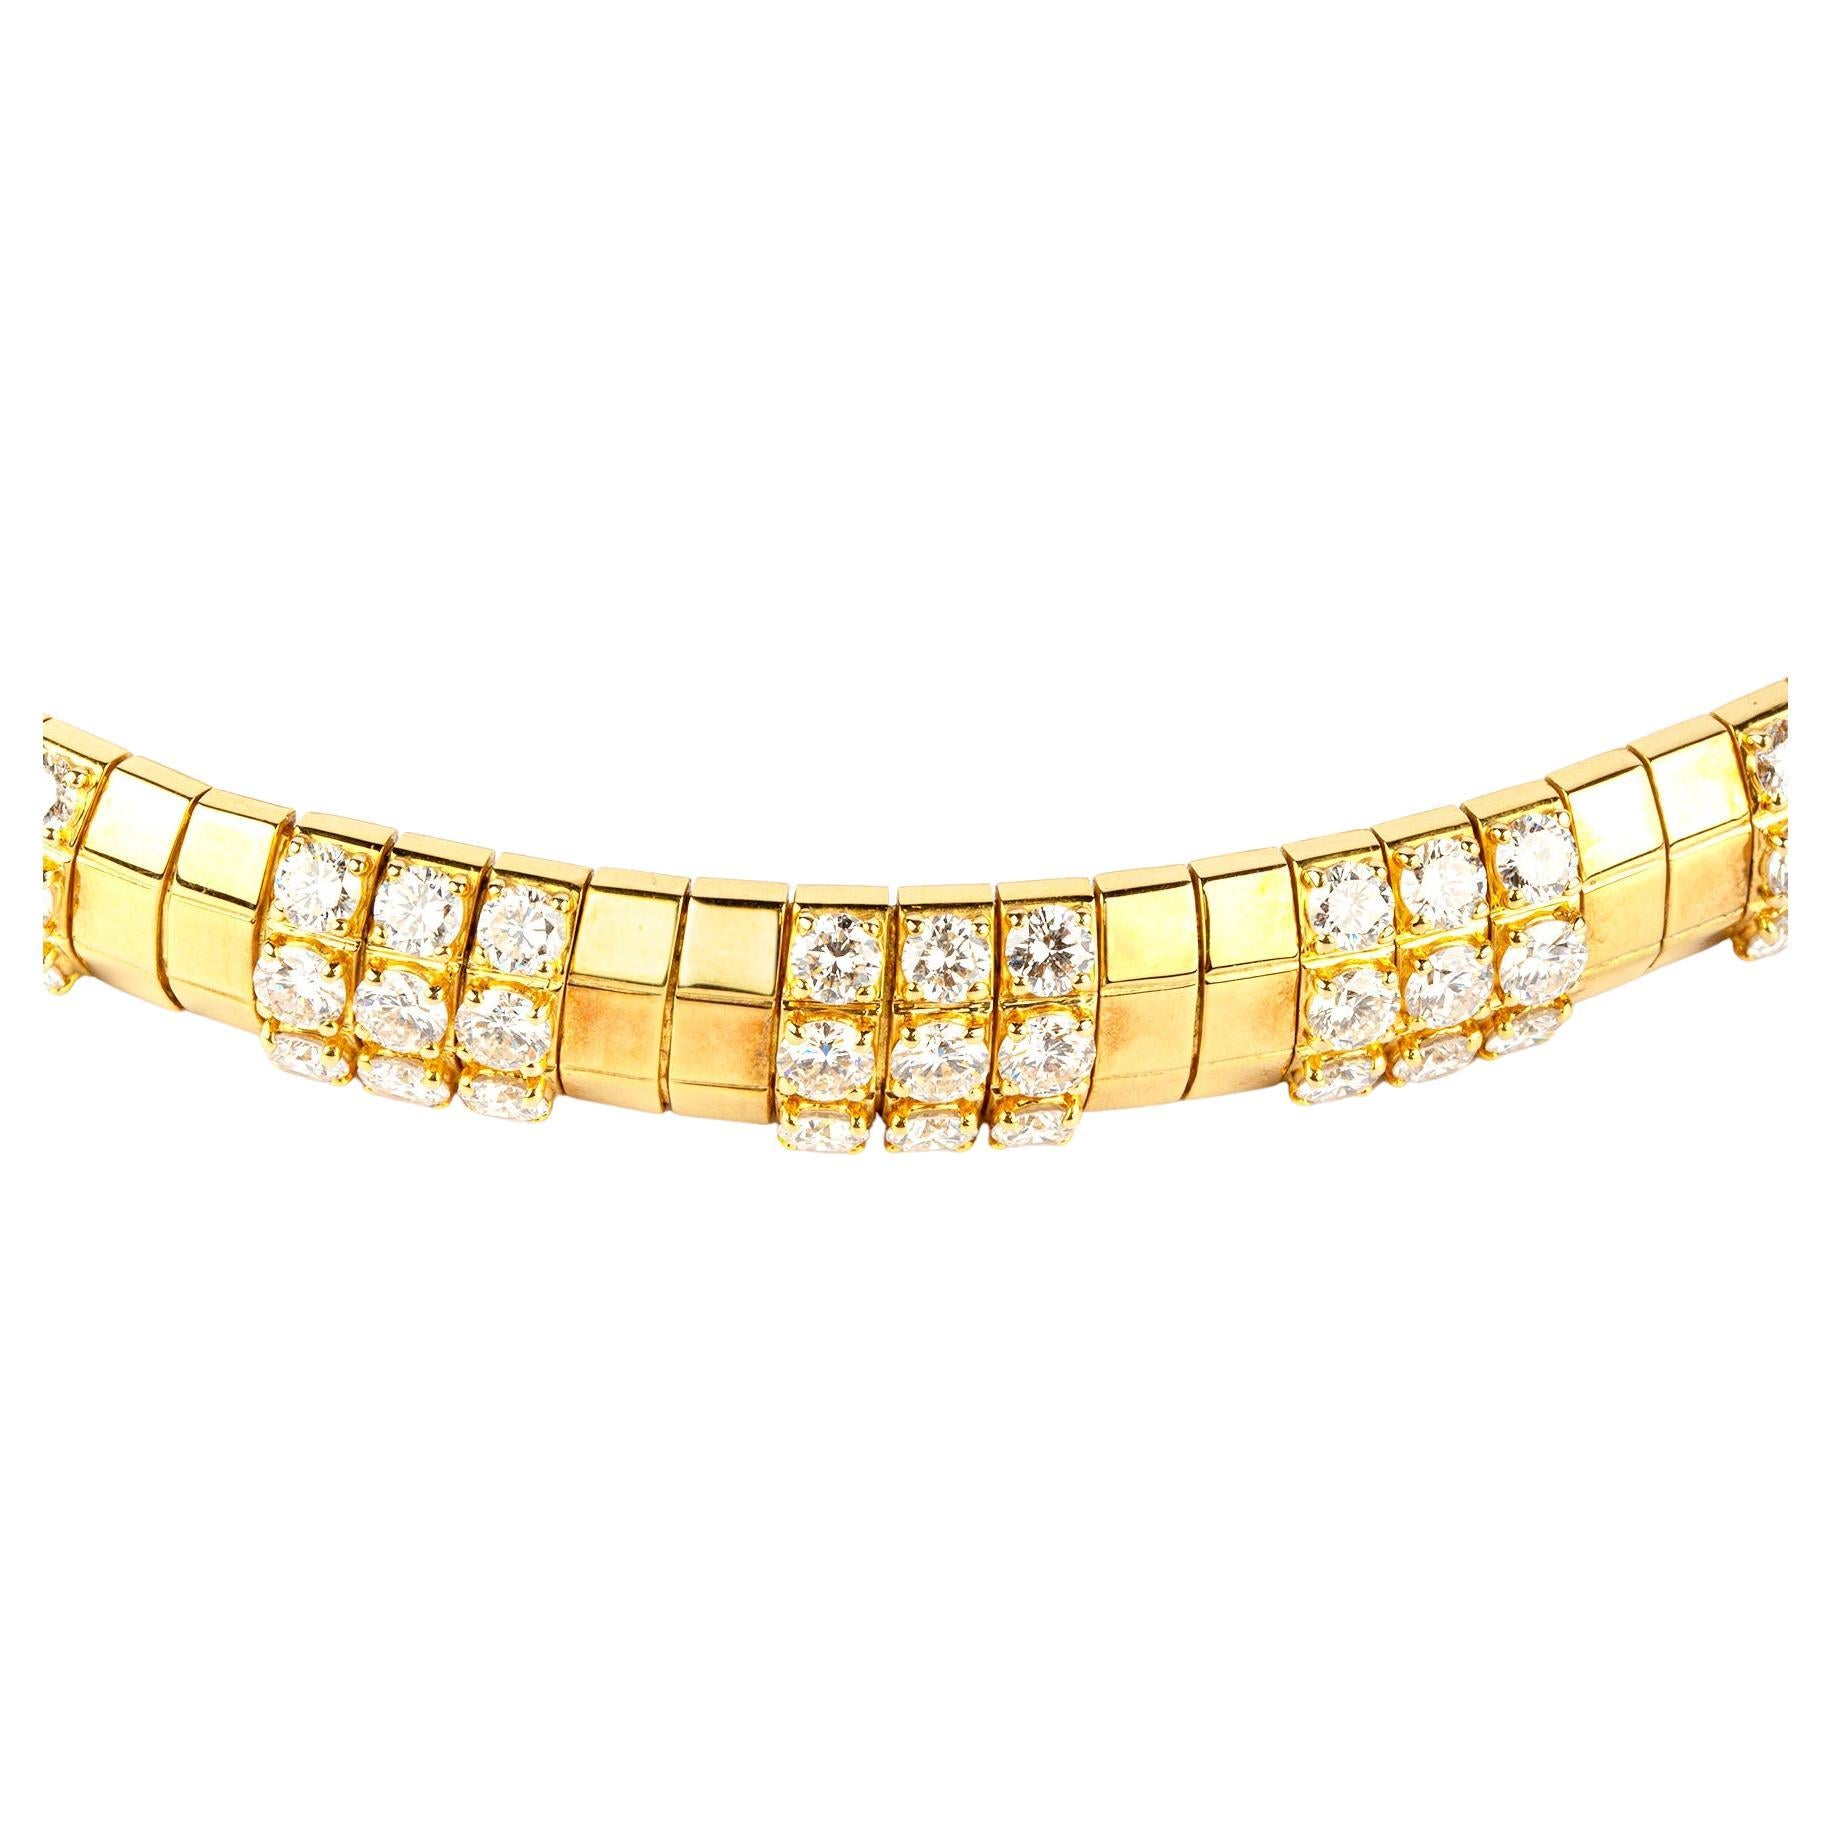 1970s Geometrical Diamond and Gold Necklace